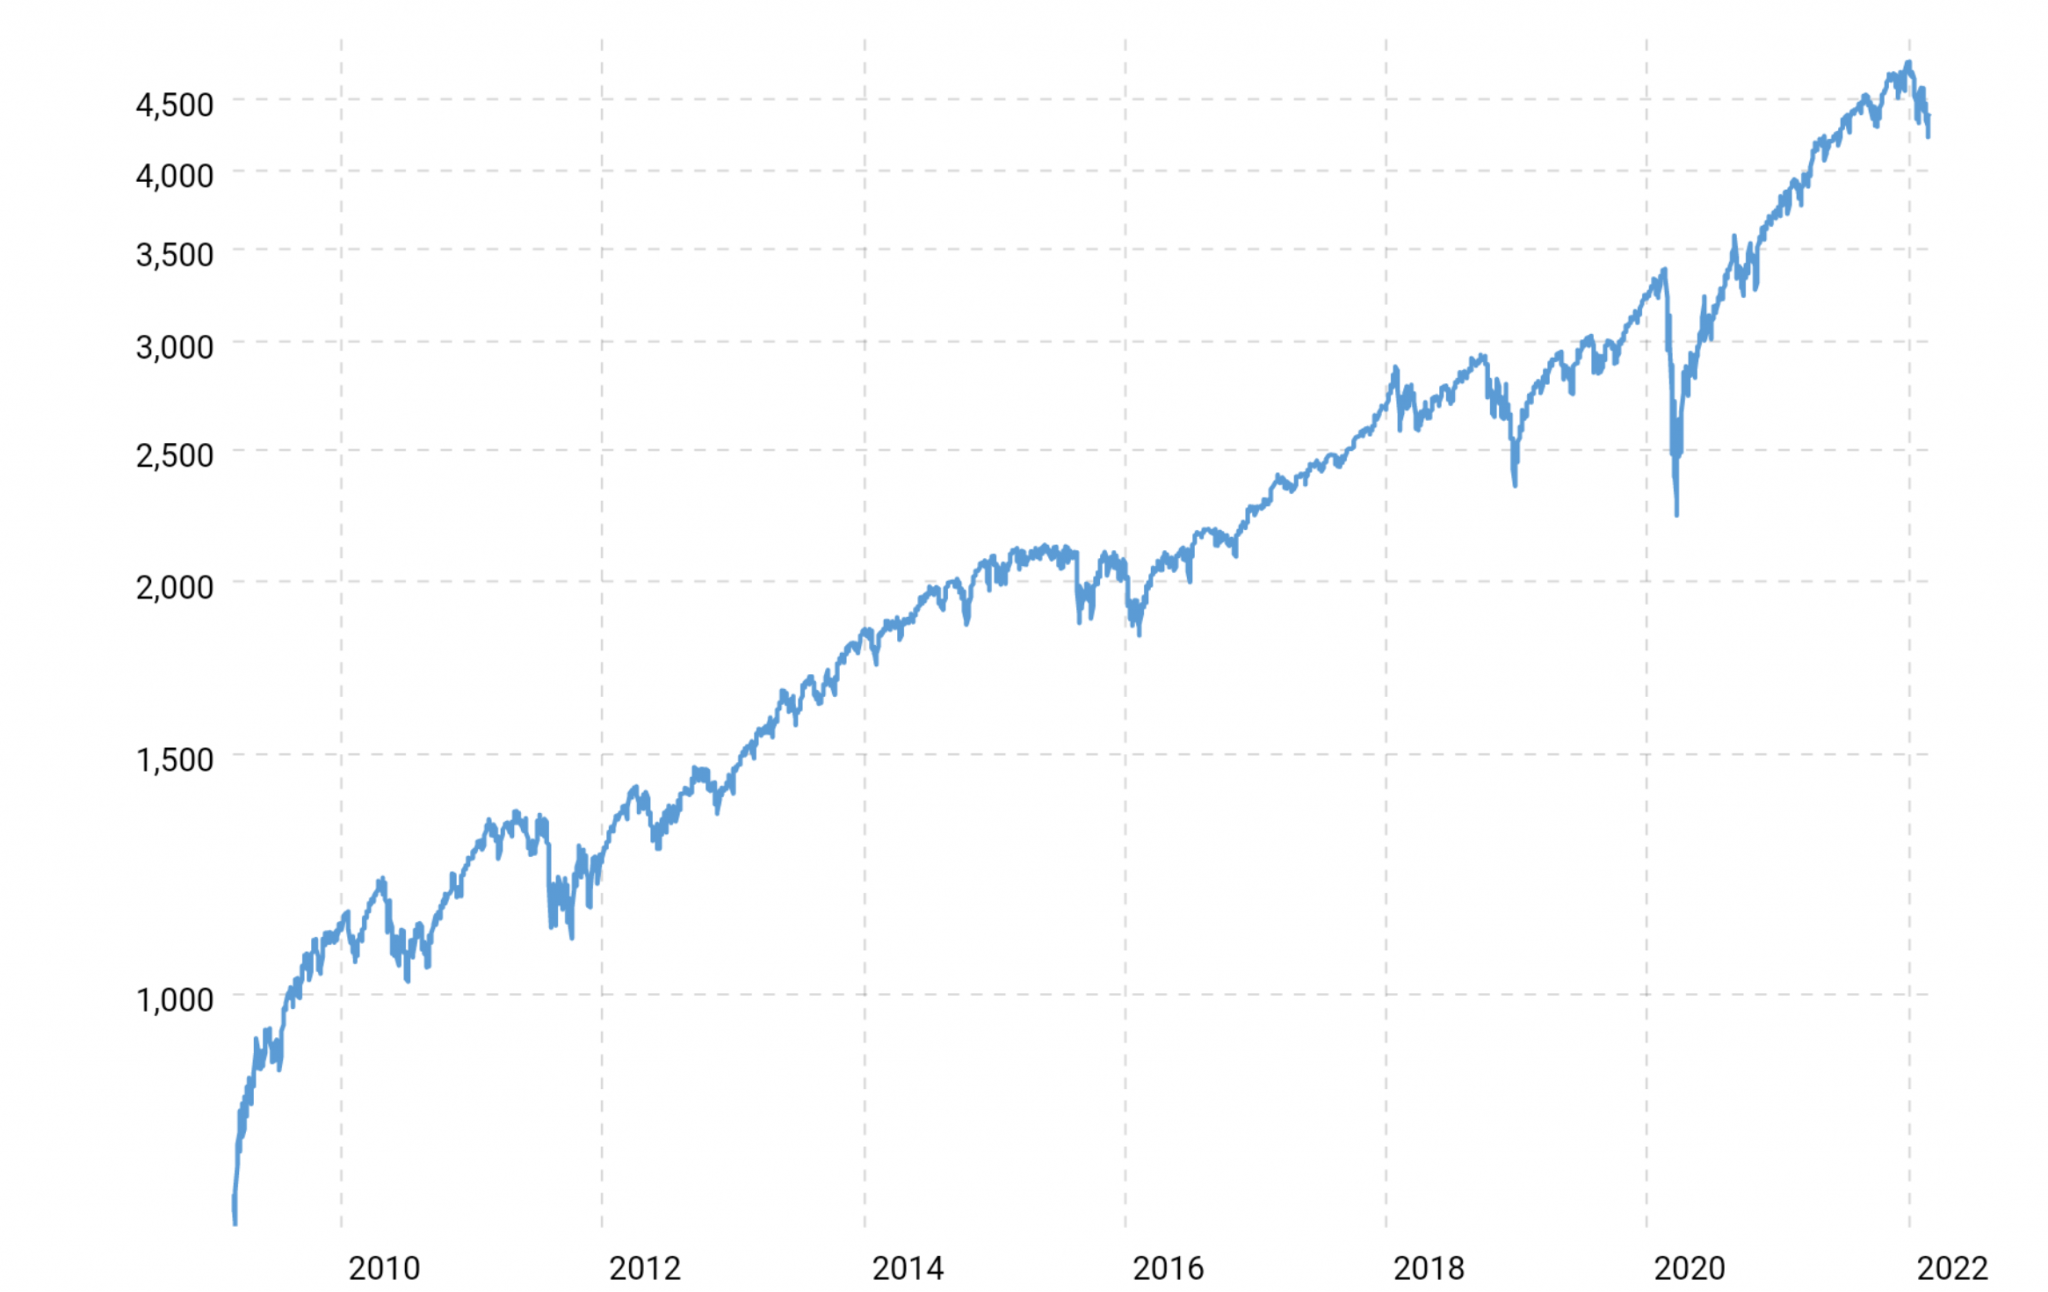 sp500-10-year-daily-chart-2022-03-01-macrotrends.png